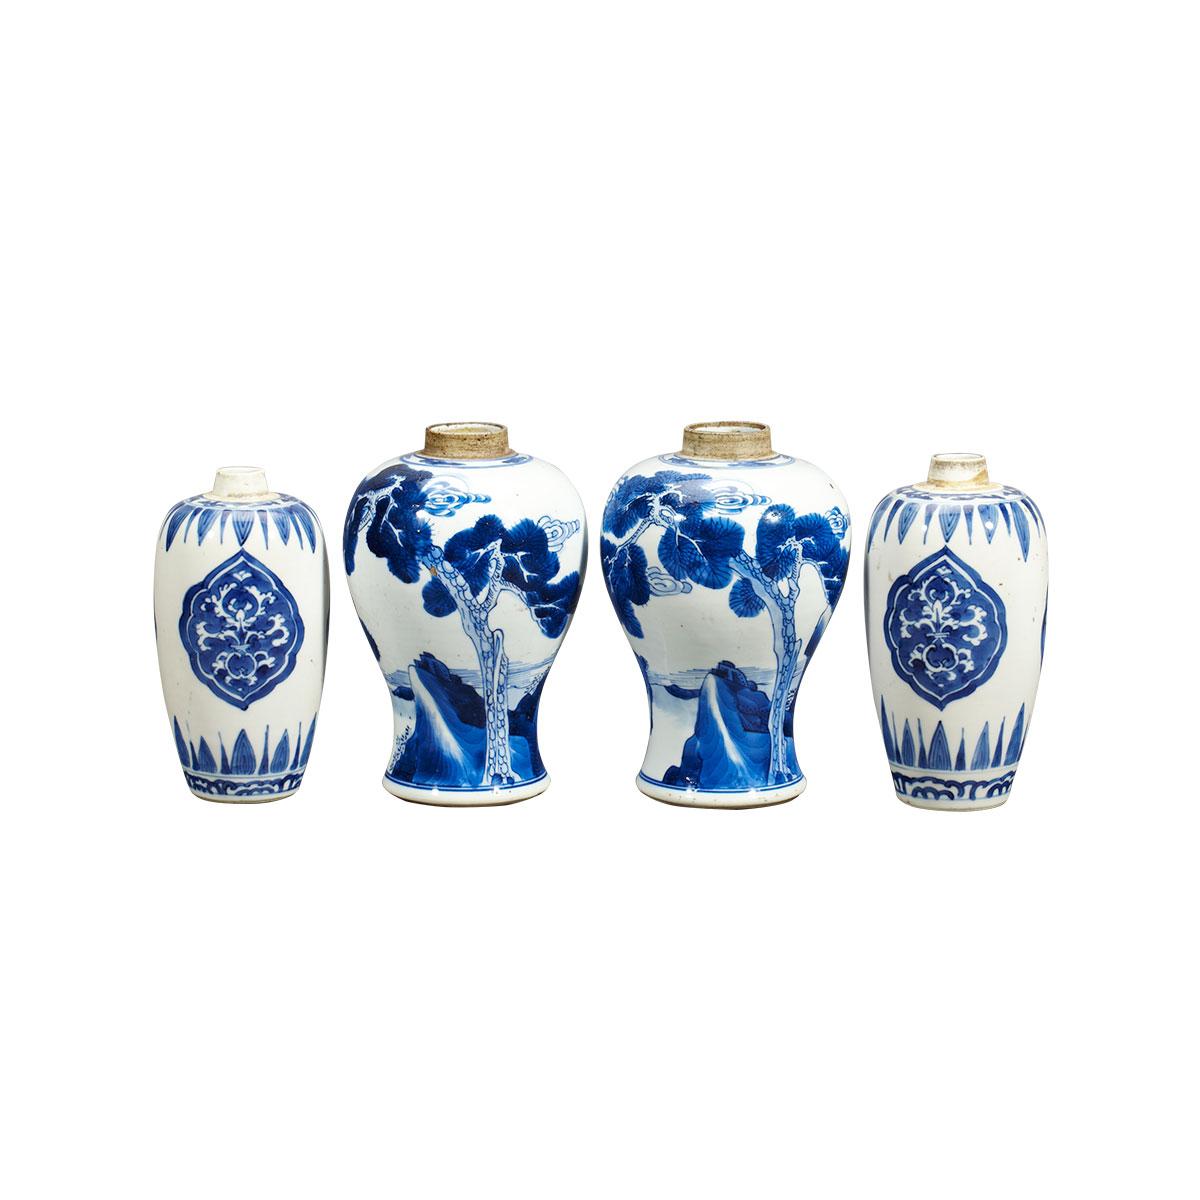 Pair of Blue and White ‘Deer and Crane’ Vases, Kangxi Period (1662-1722) 